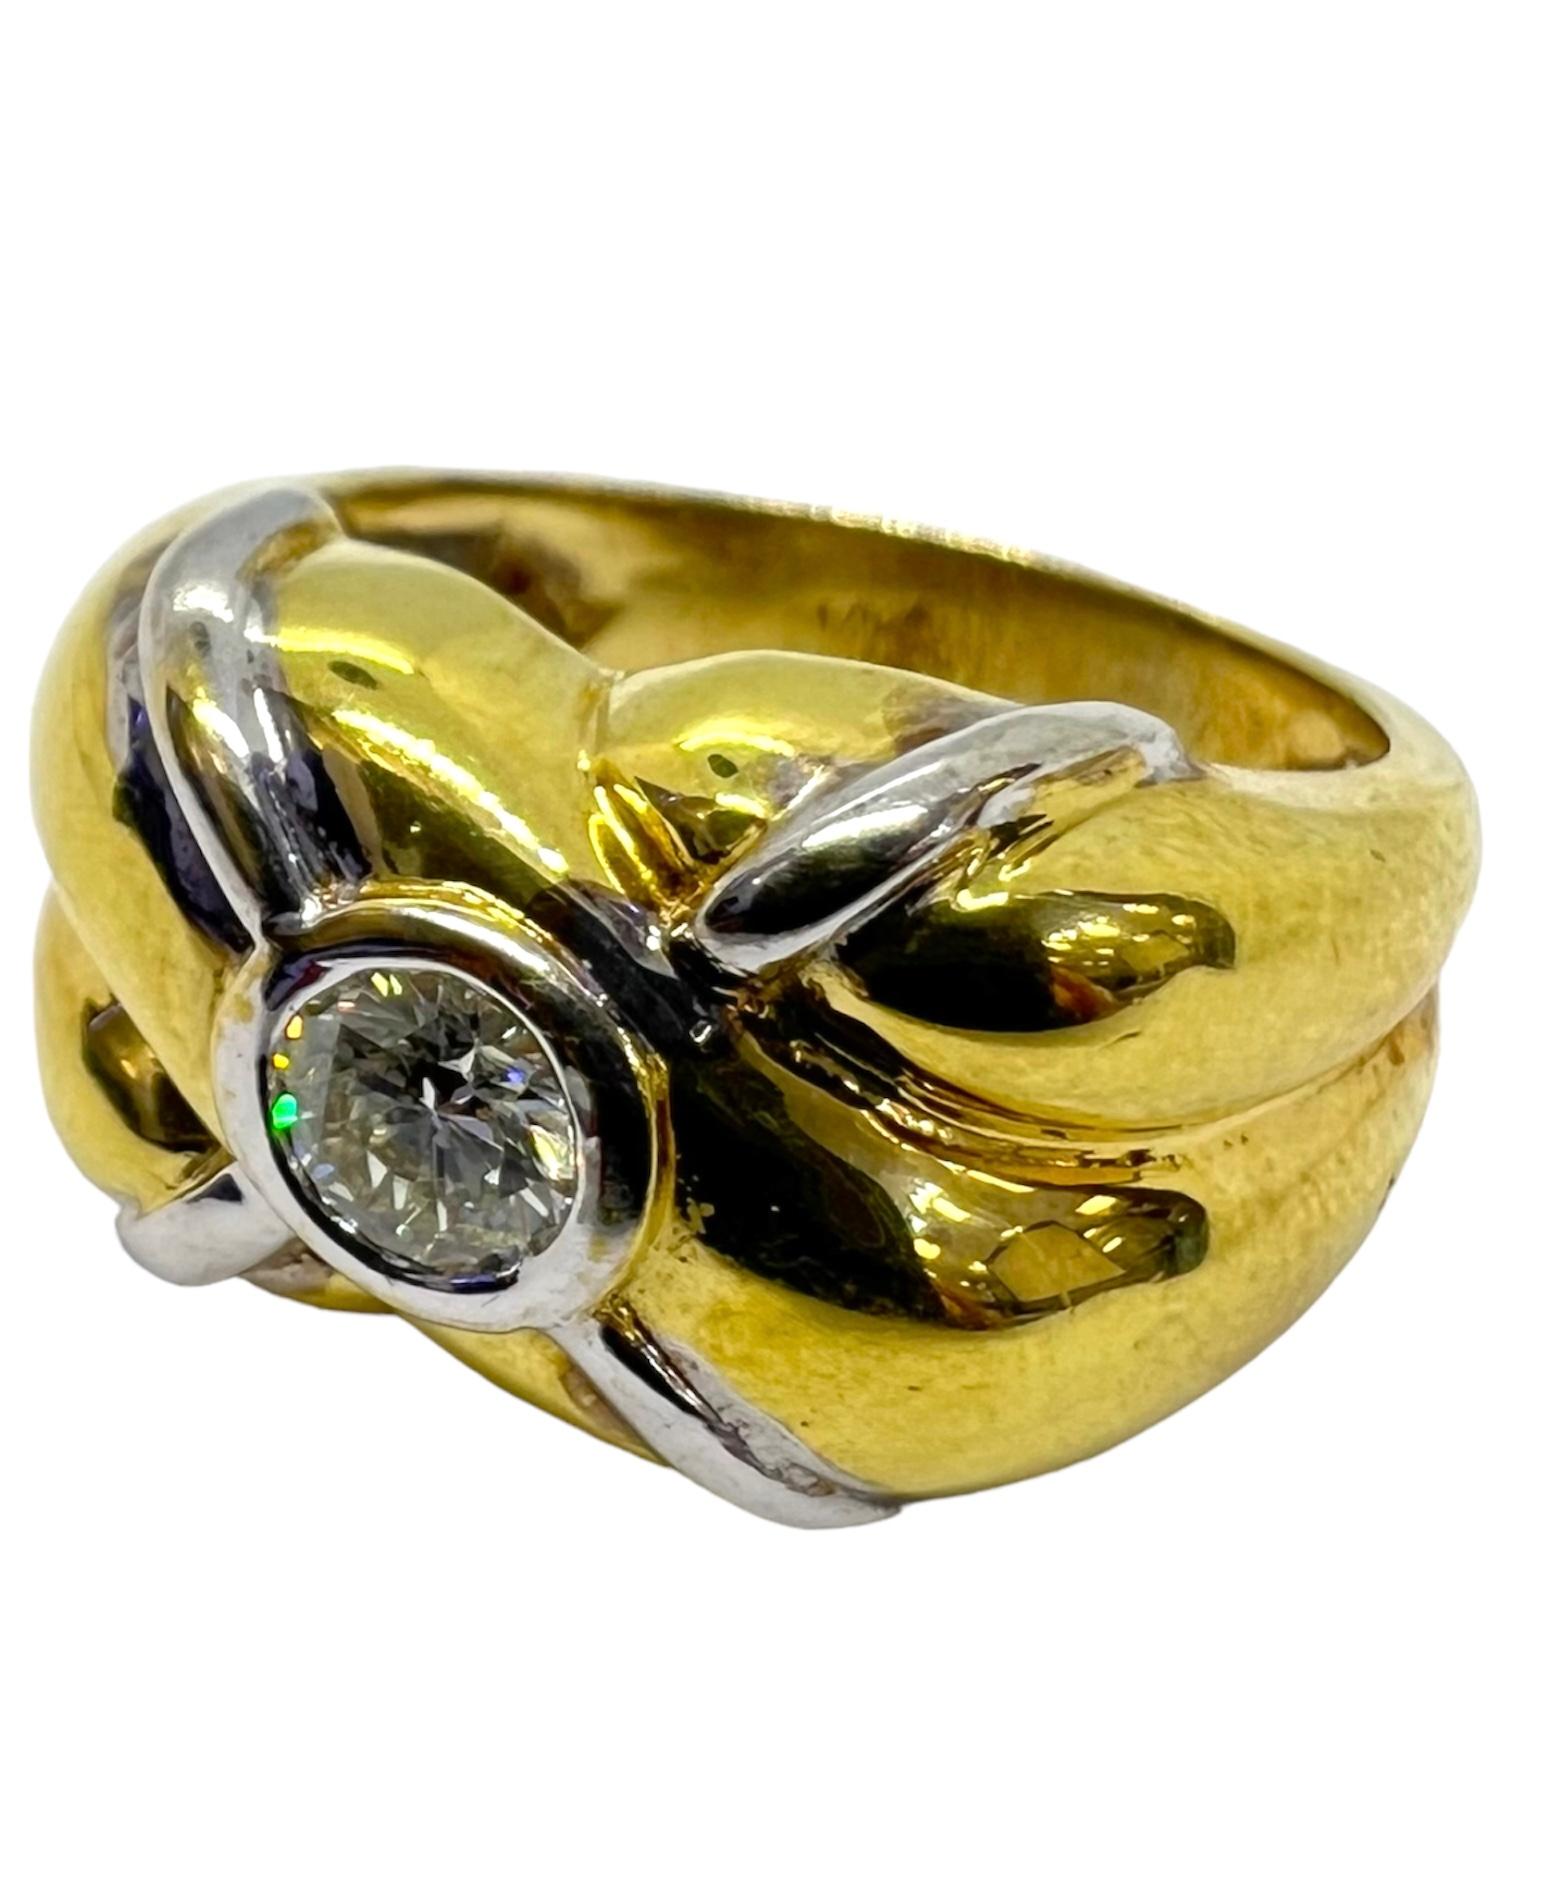 18K yellow gold ring with round center diamond.

Sophia D by Joseph Dardashti LTD has been known worldwide for 35 years and are inspired by classic Art Deco design that merges with modern manufacturing techniques.  